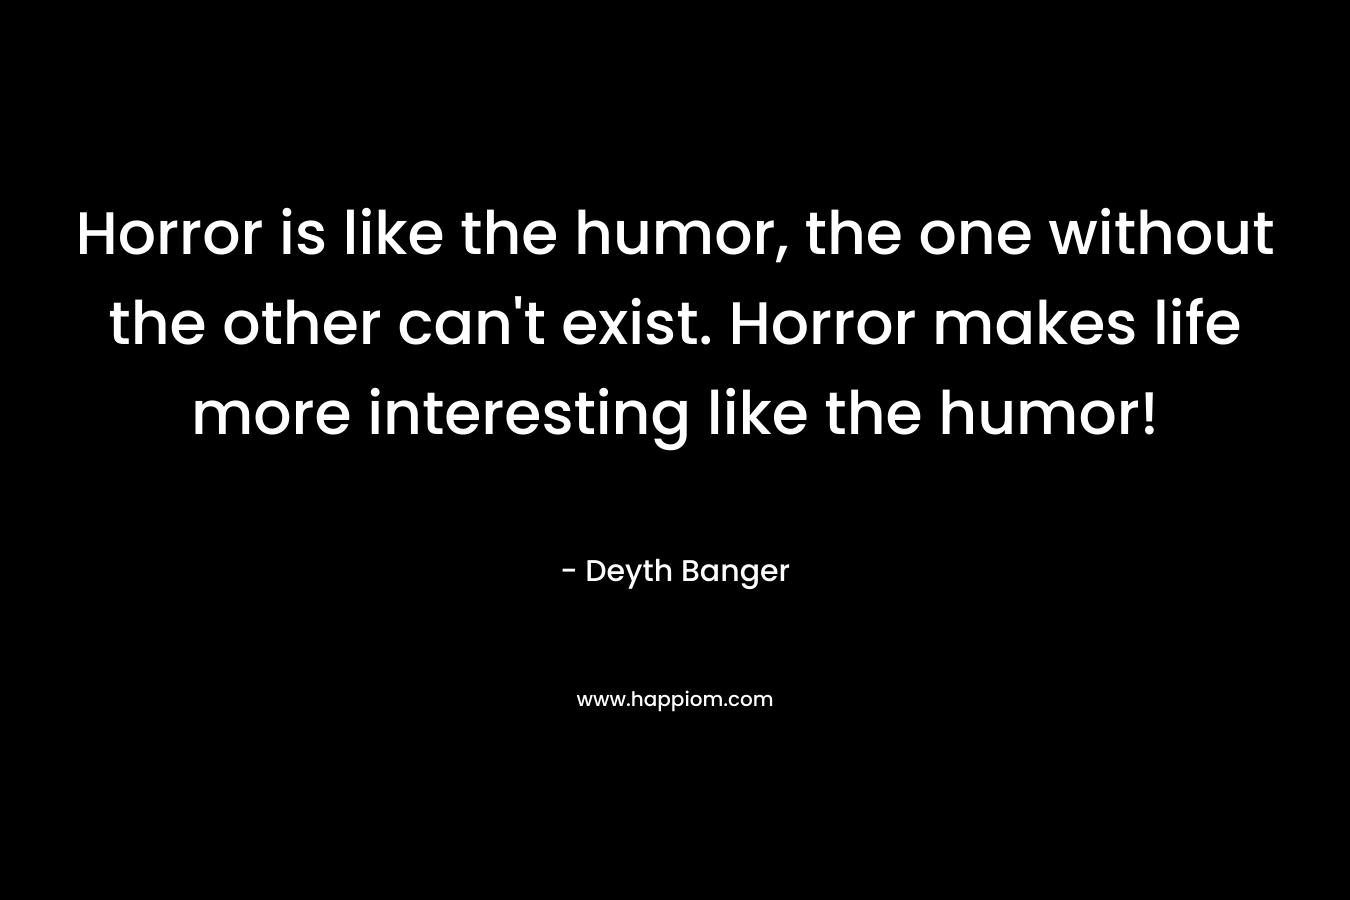 Horror is like the humor, the one without the other can't exist. Horror makes life more interesting like the humor!